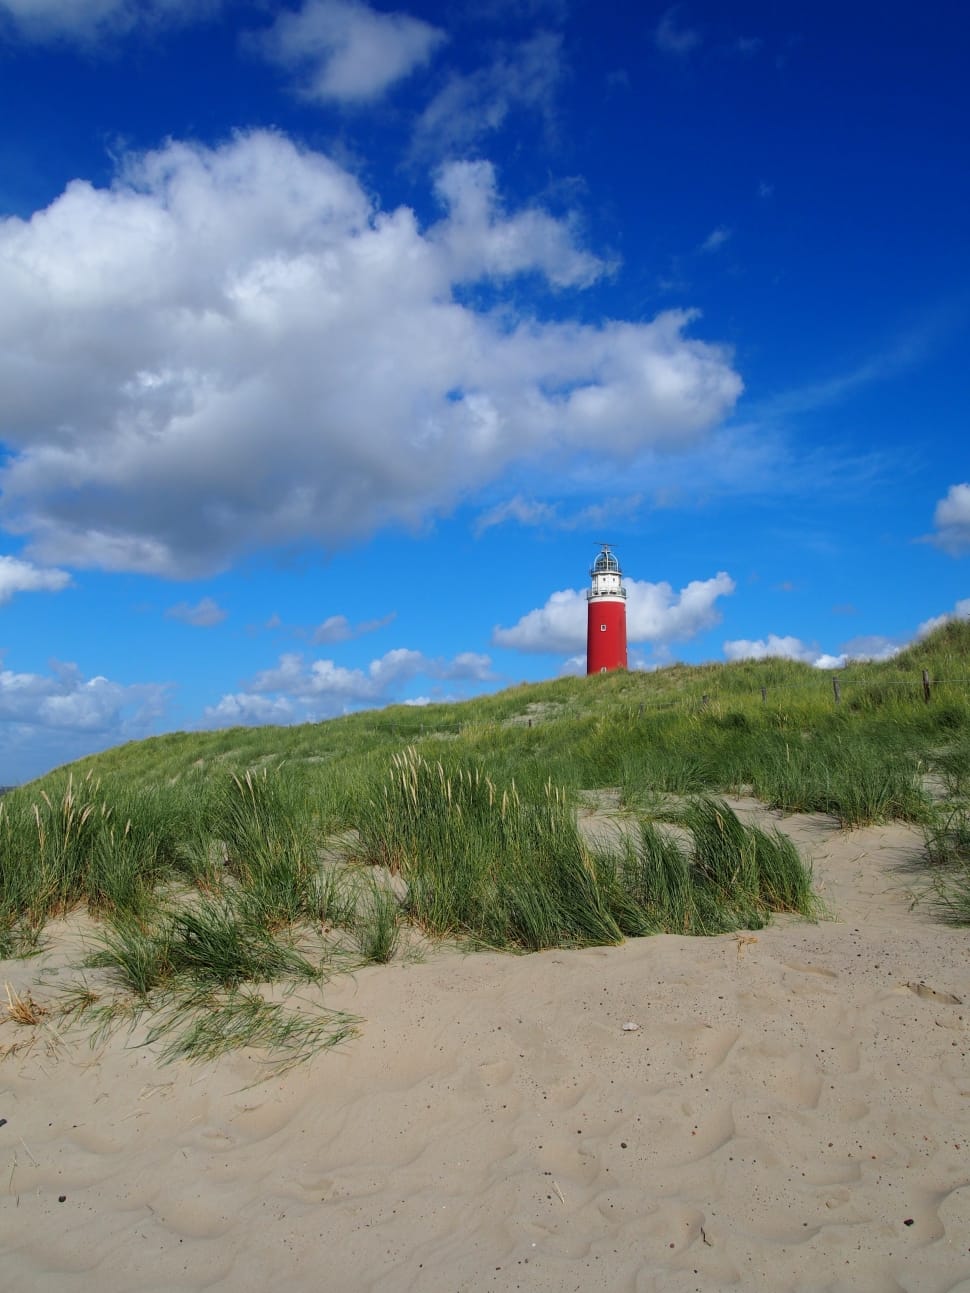 red and white light house near grass field under blue sunny cloudy sky preview